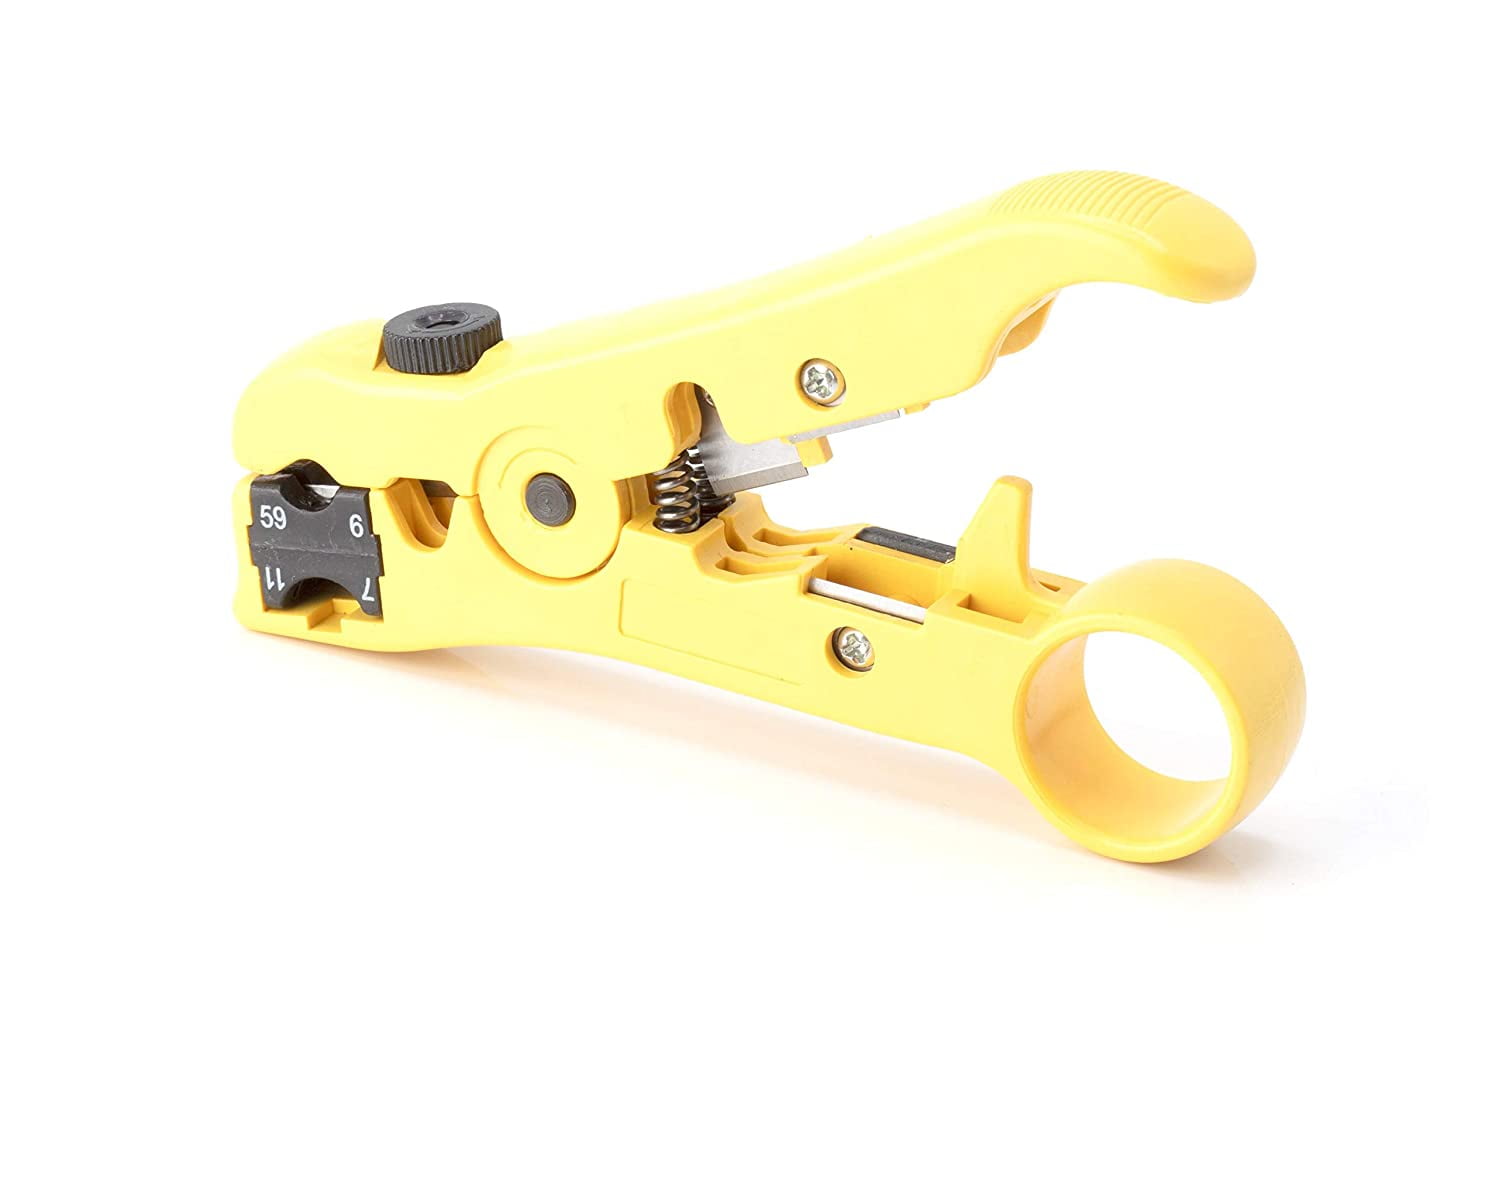 Ideal 45-520 Adjustable Coax Cable Stripper Rg-59 Rg-6 Rg6q for sale online 